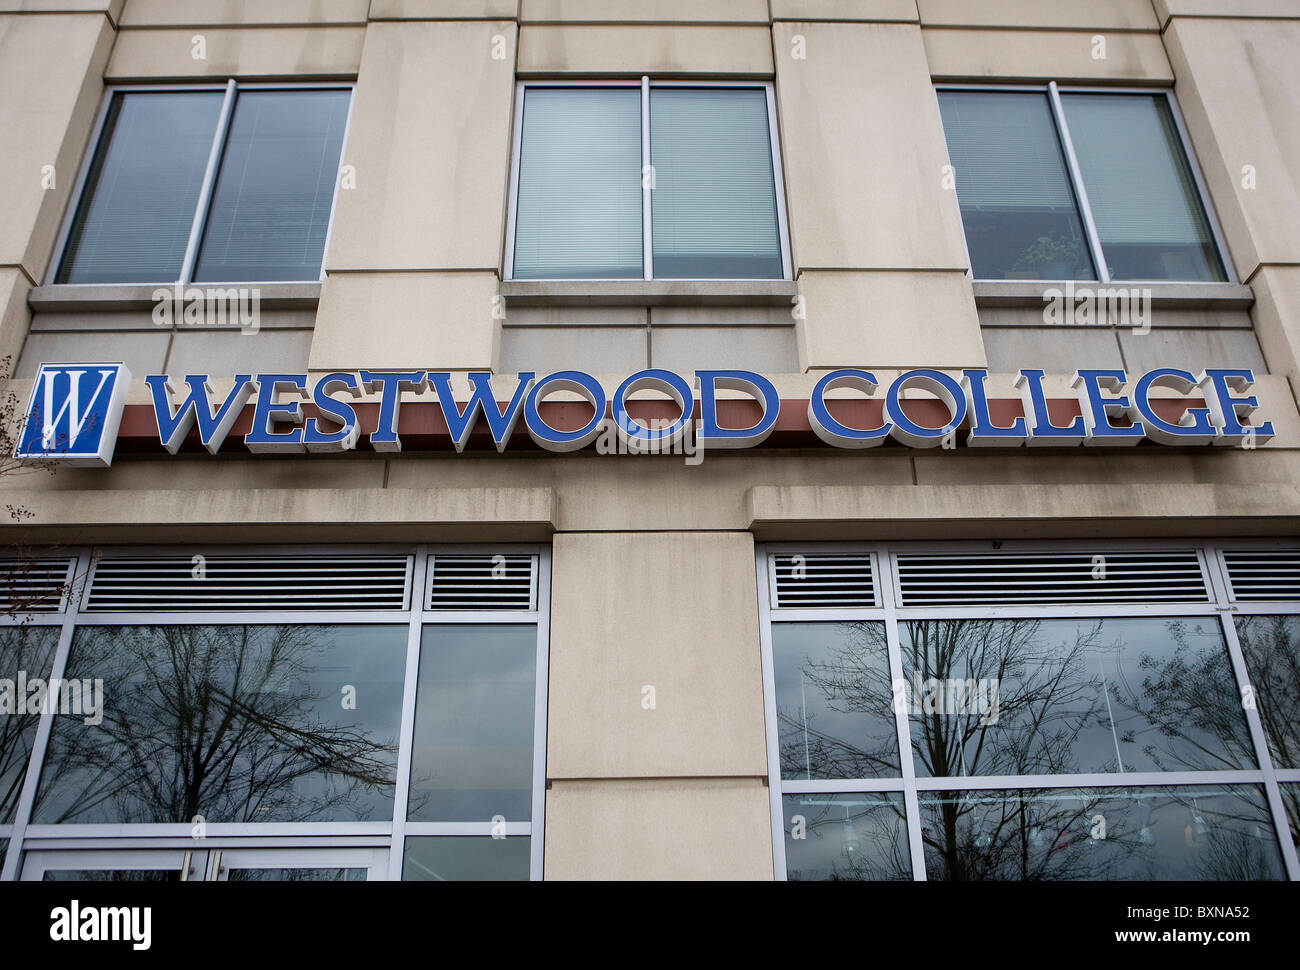 A Westwood College for-profit college. Foto Stock